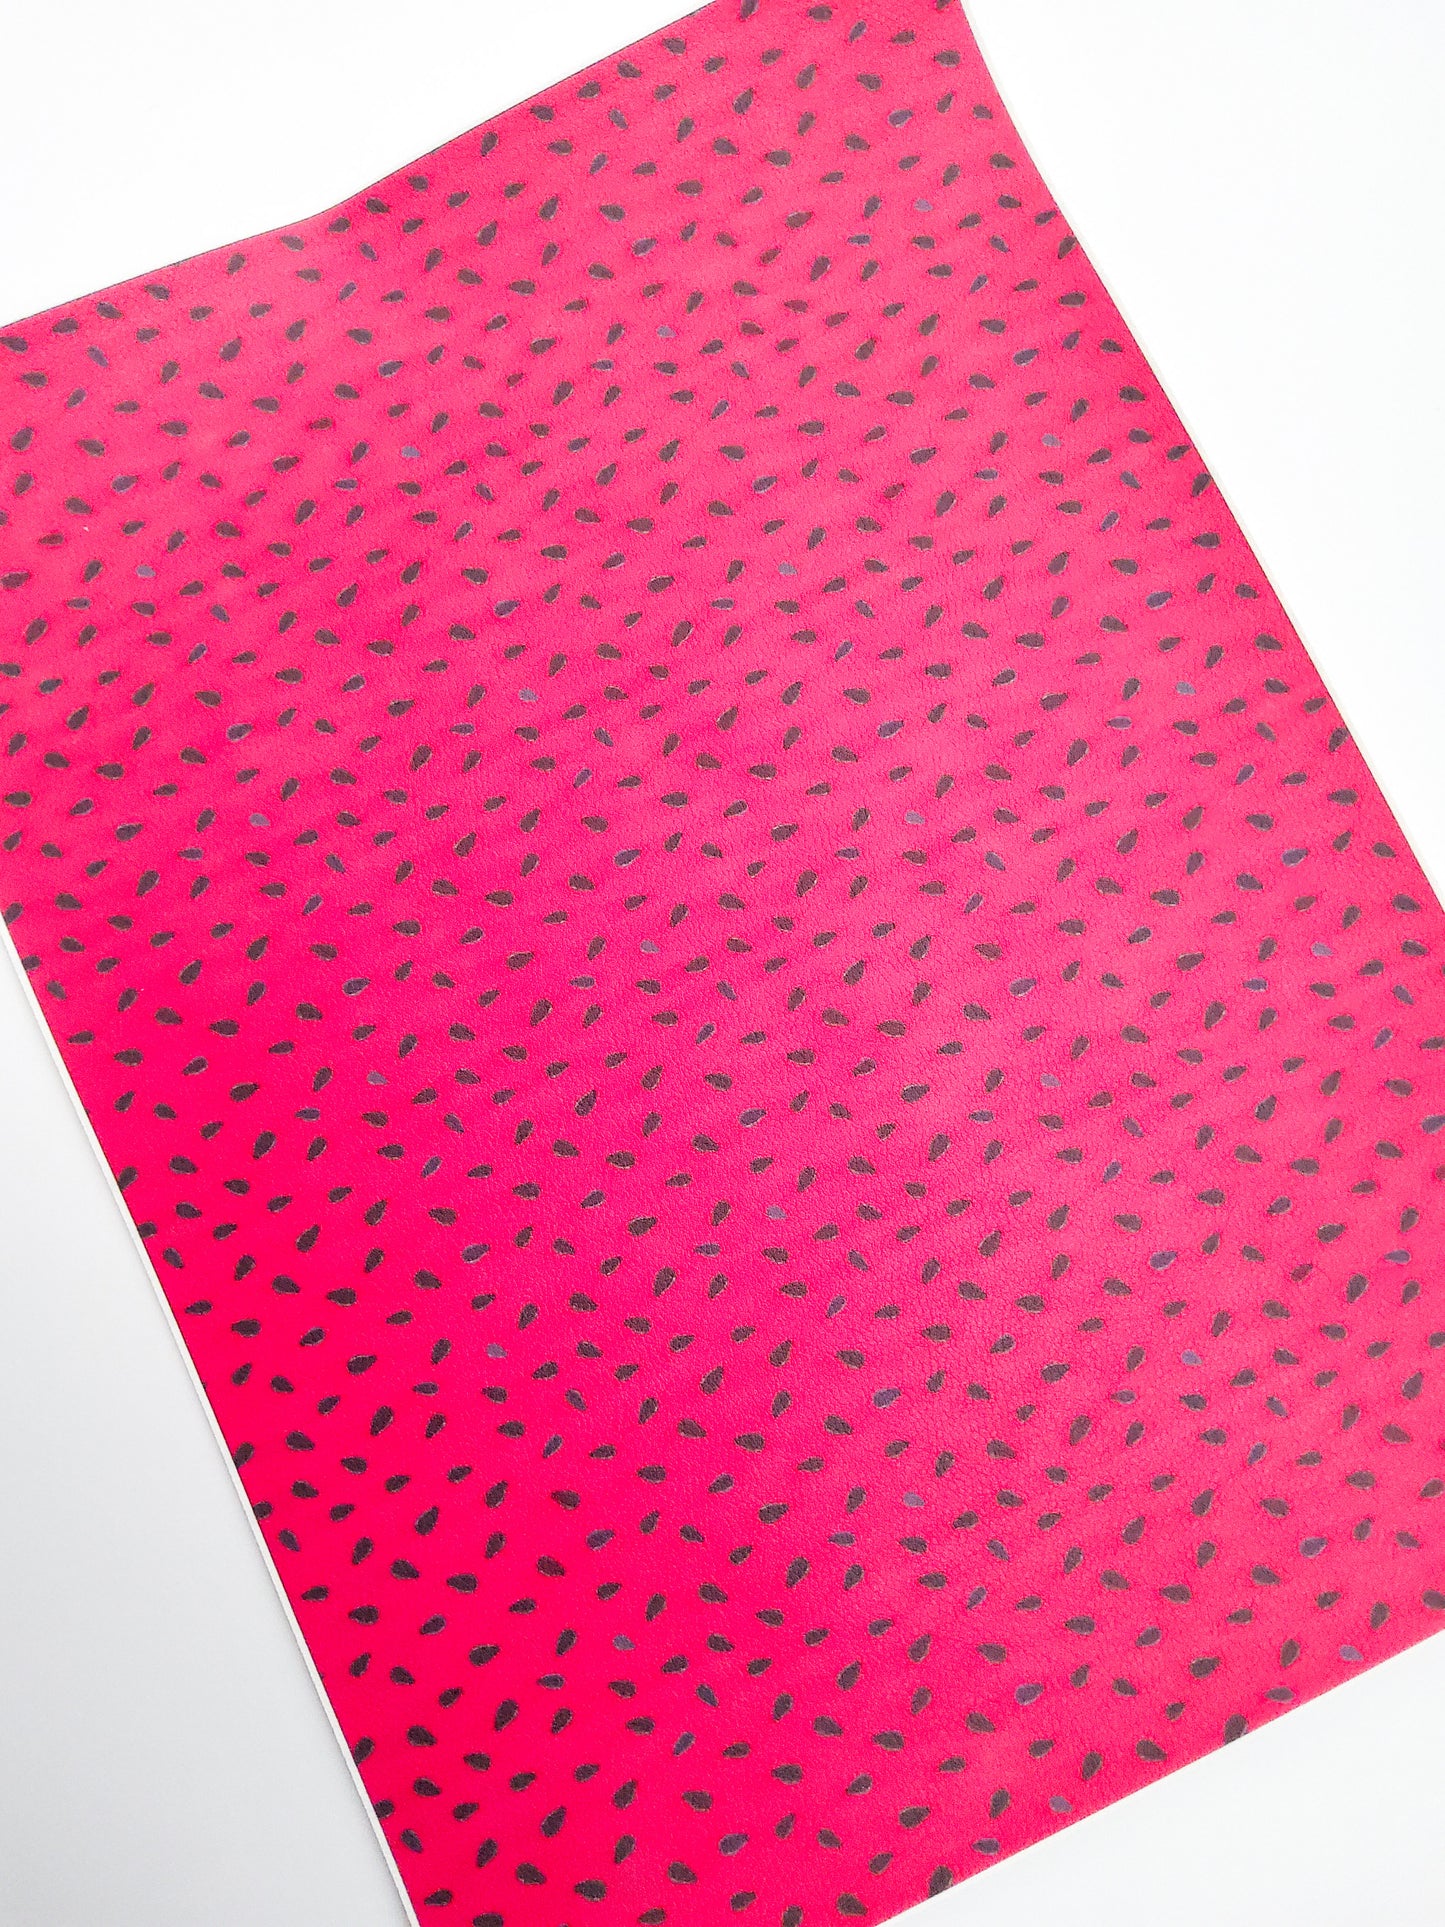 Watermelon Seeds 9x12 faux leather sheet